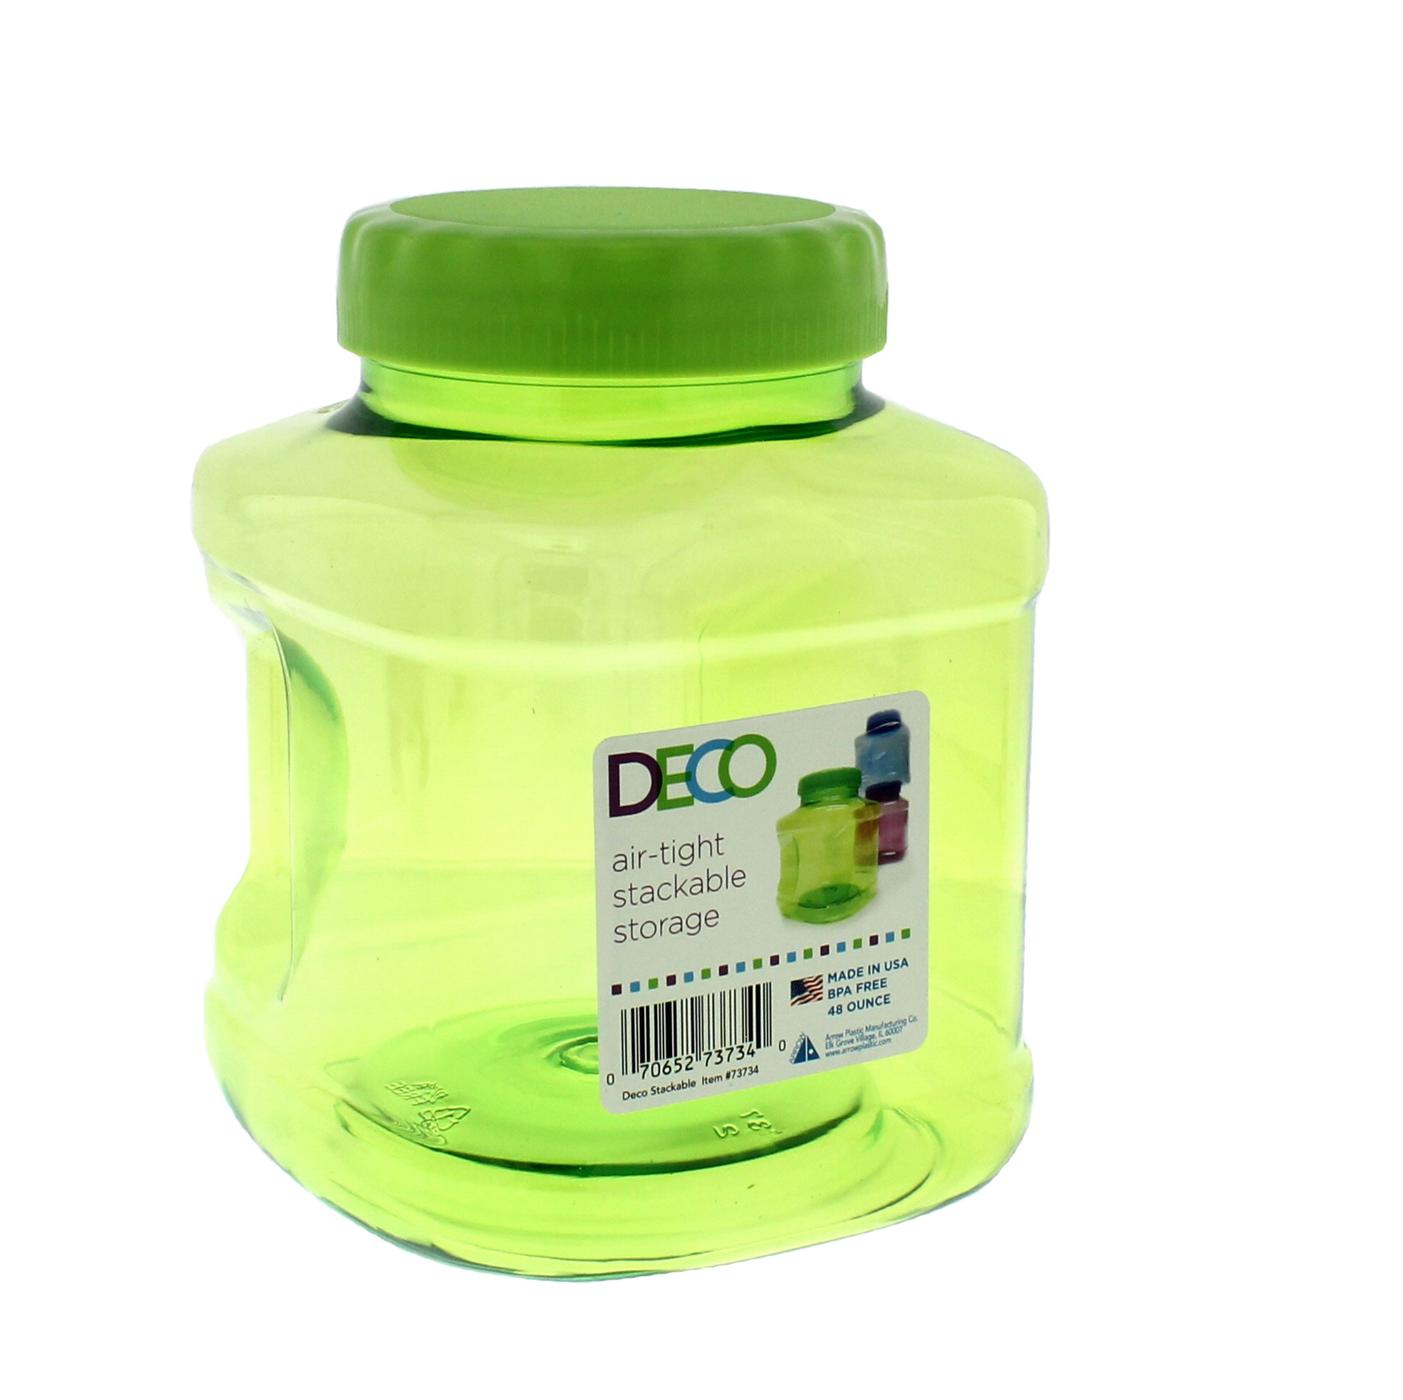 Arrow Deco Stackable 48oz Storage Container, Colors May Vary; image 2 of 3